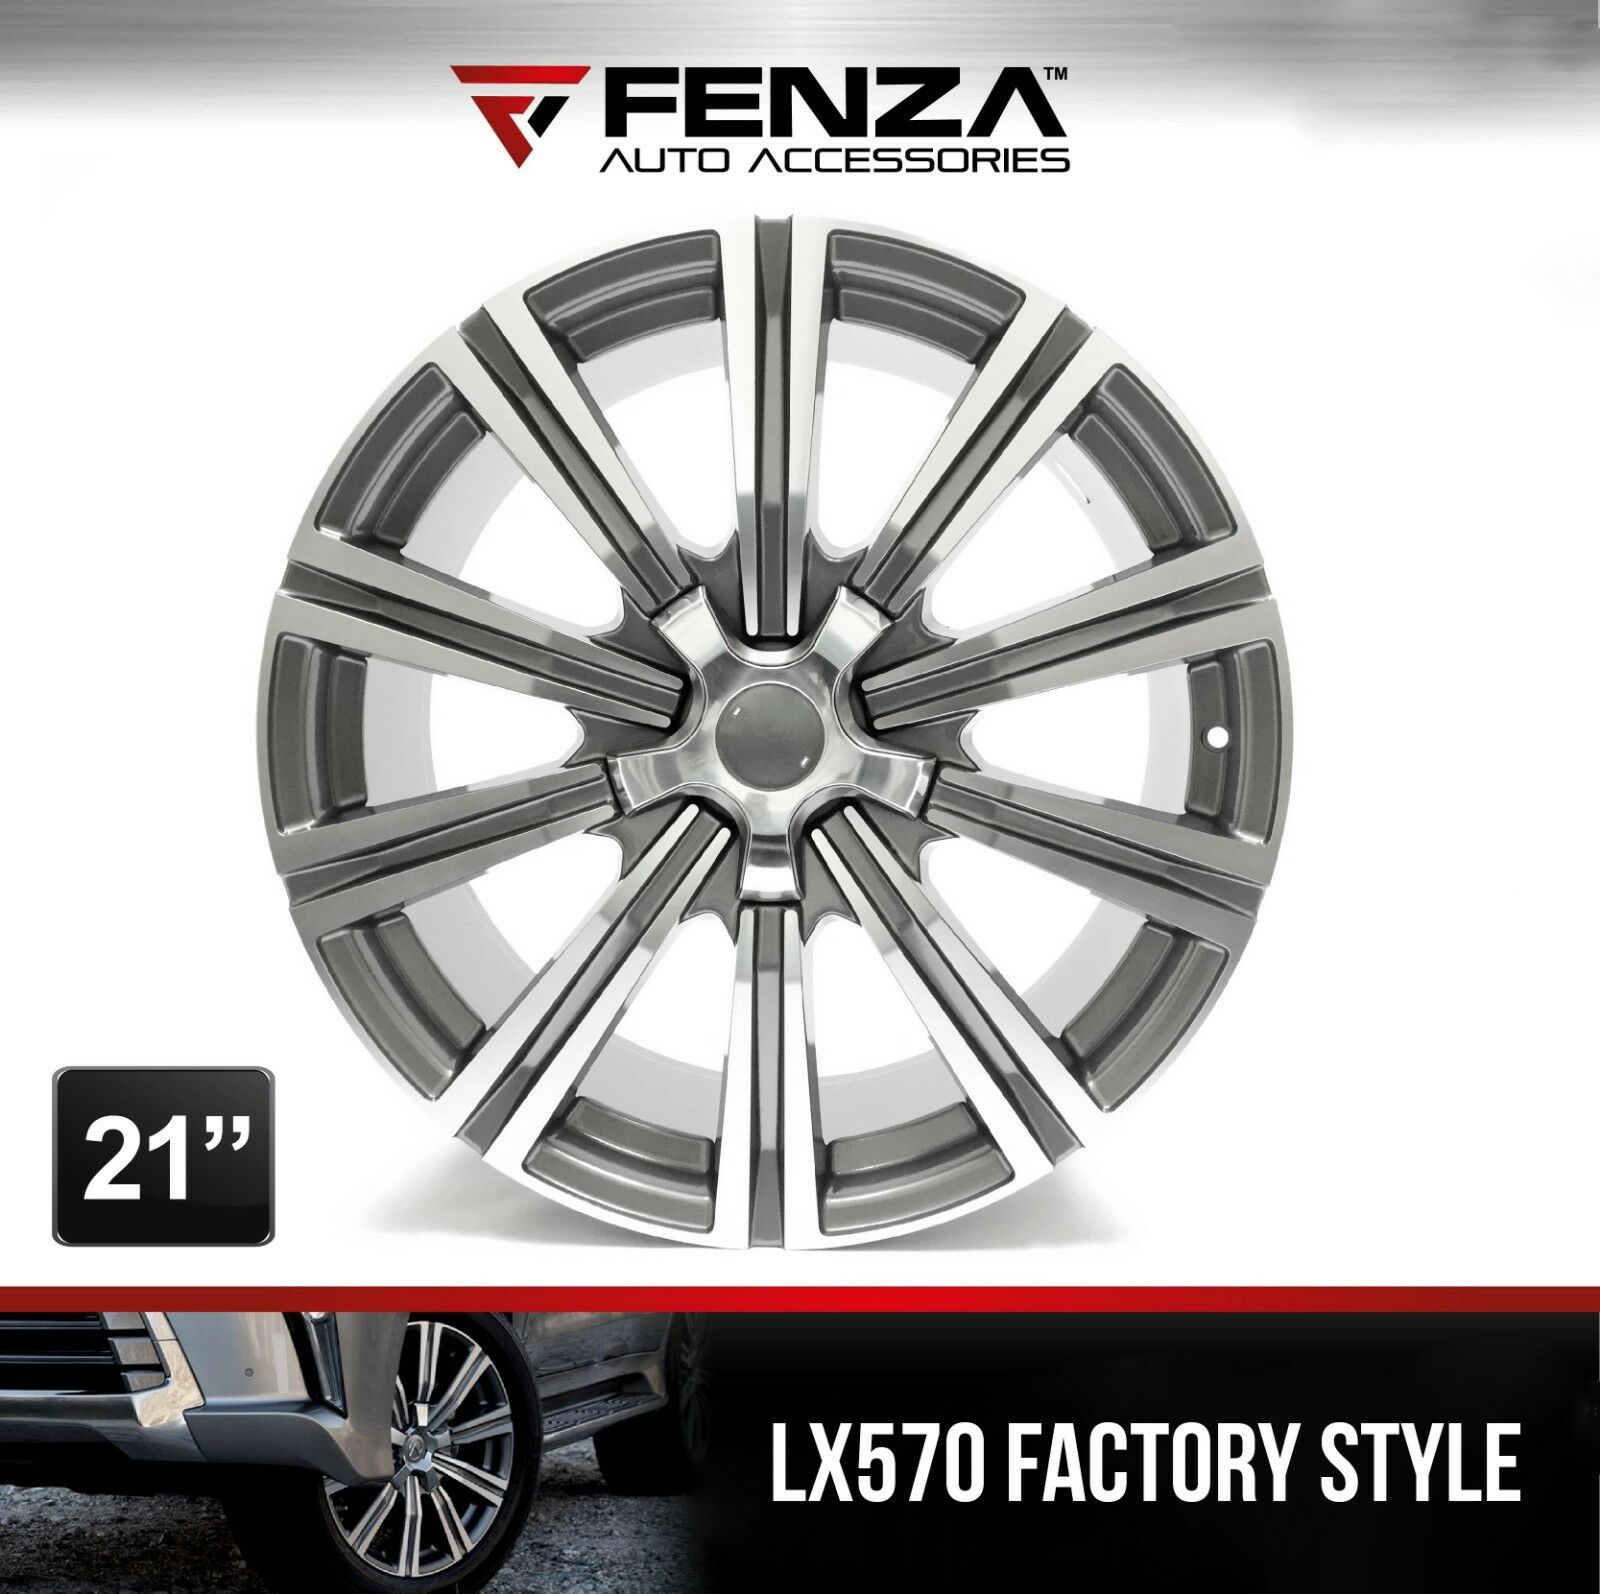 21" Inches LX-570 Factory Style Wheels Fit Lexus, Toyota Set of 4 Rims, 5 Bolts